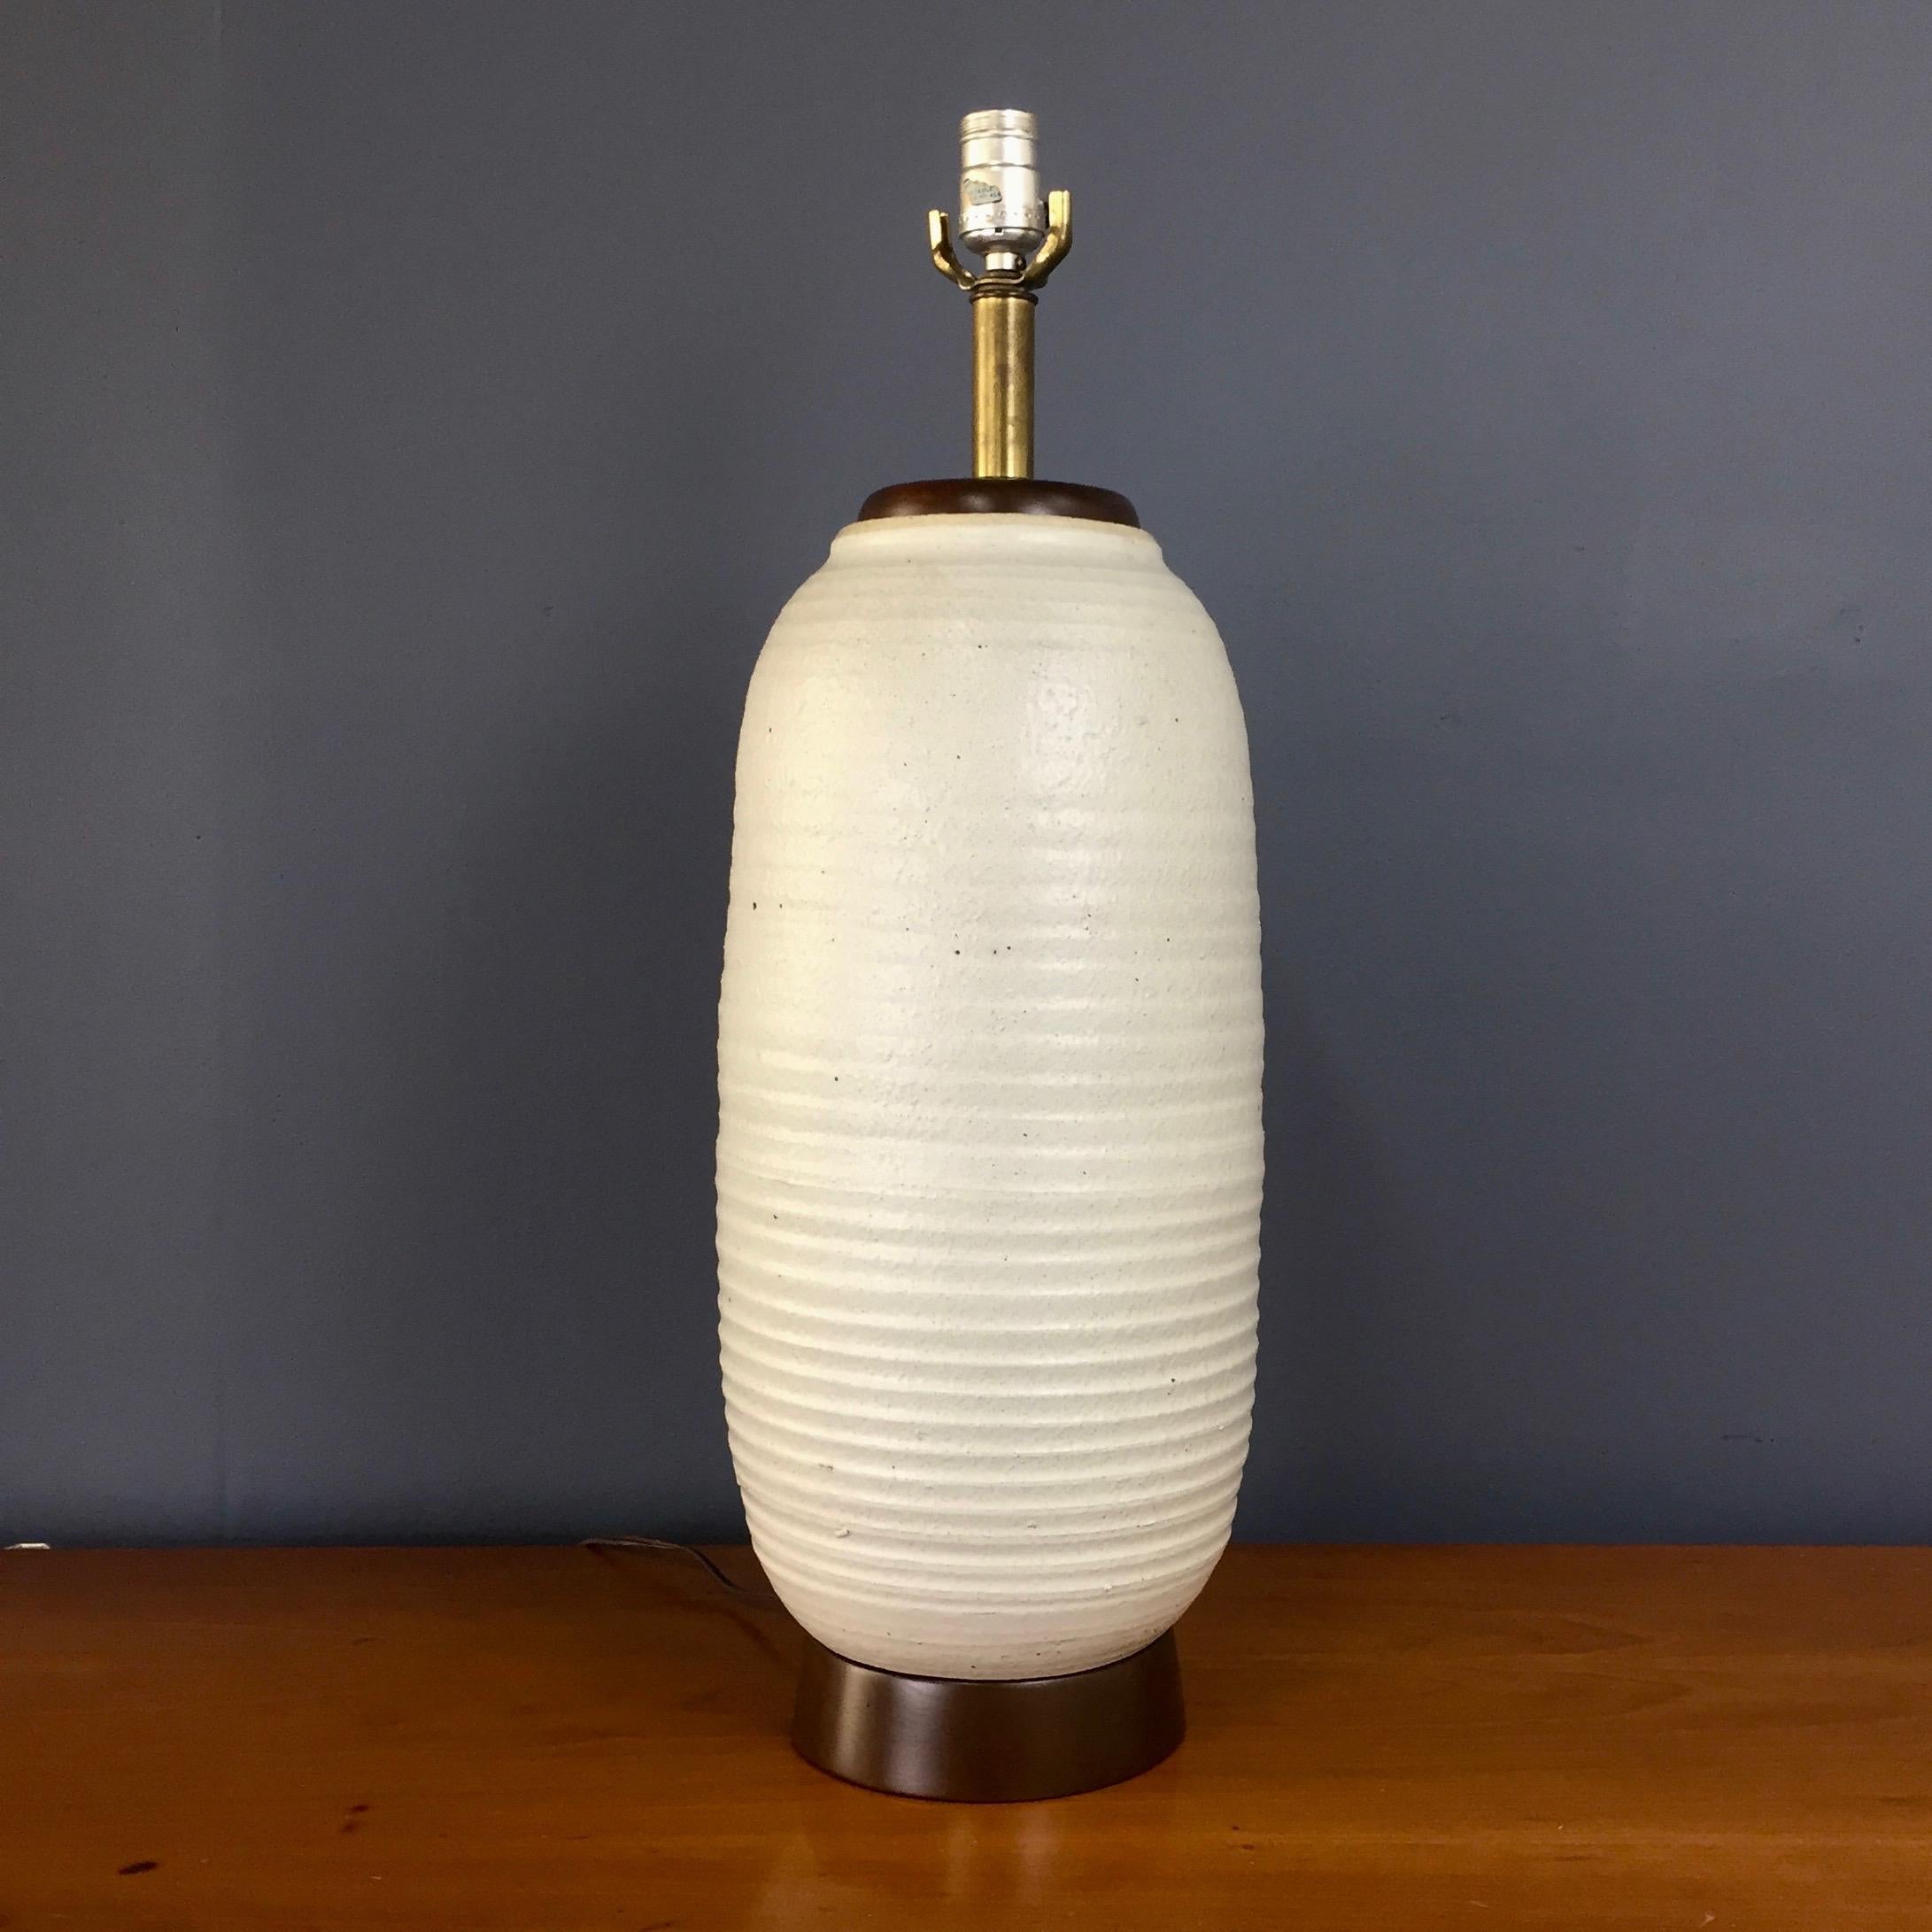 Stunning large ceramic lamp in textured oatmeal glaze with a cylindrical ribbed design. The lamp sits on a walnut plinth and has a walnut cap. this lamp has been rewired and the walnut has been refinished.